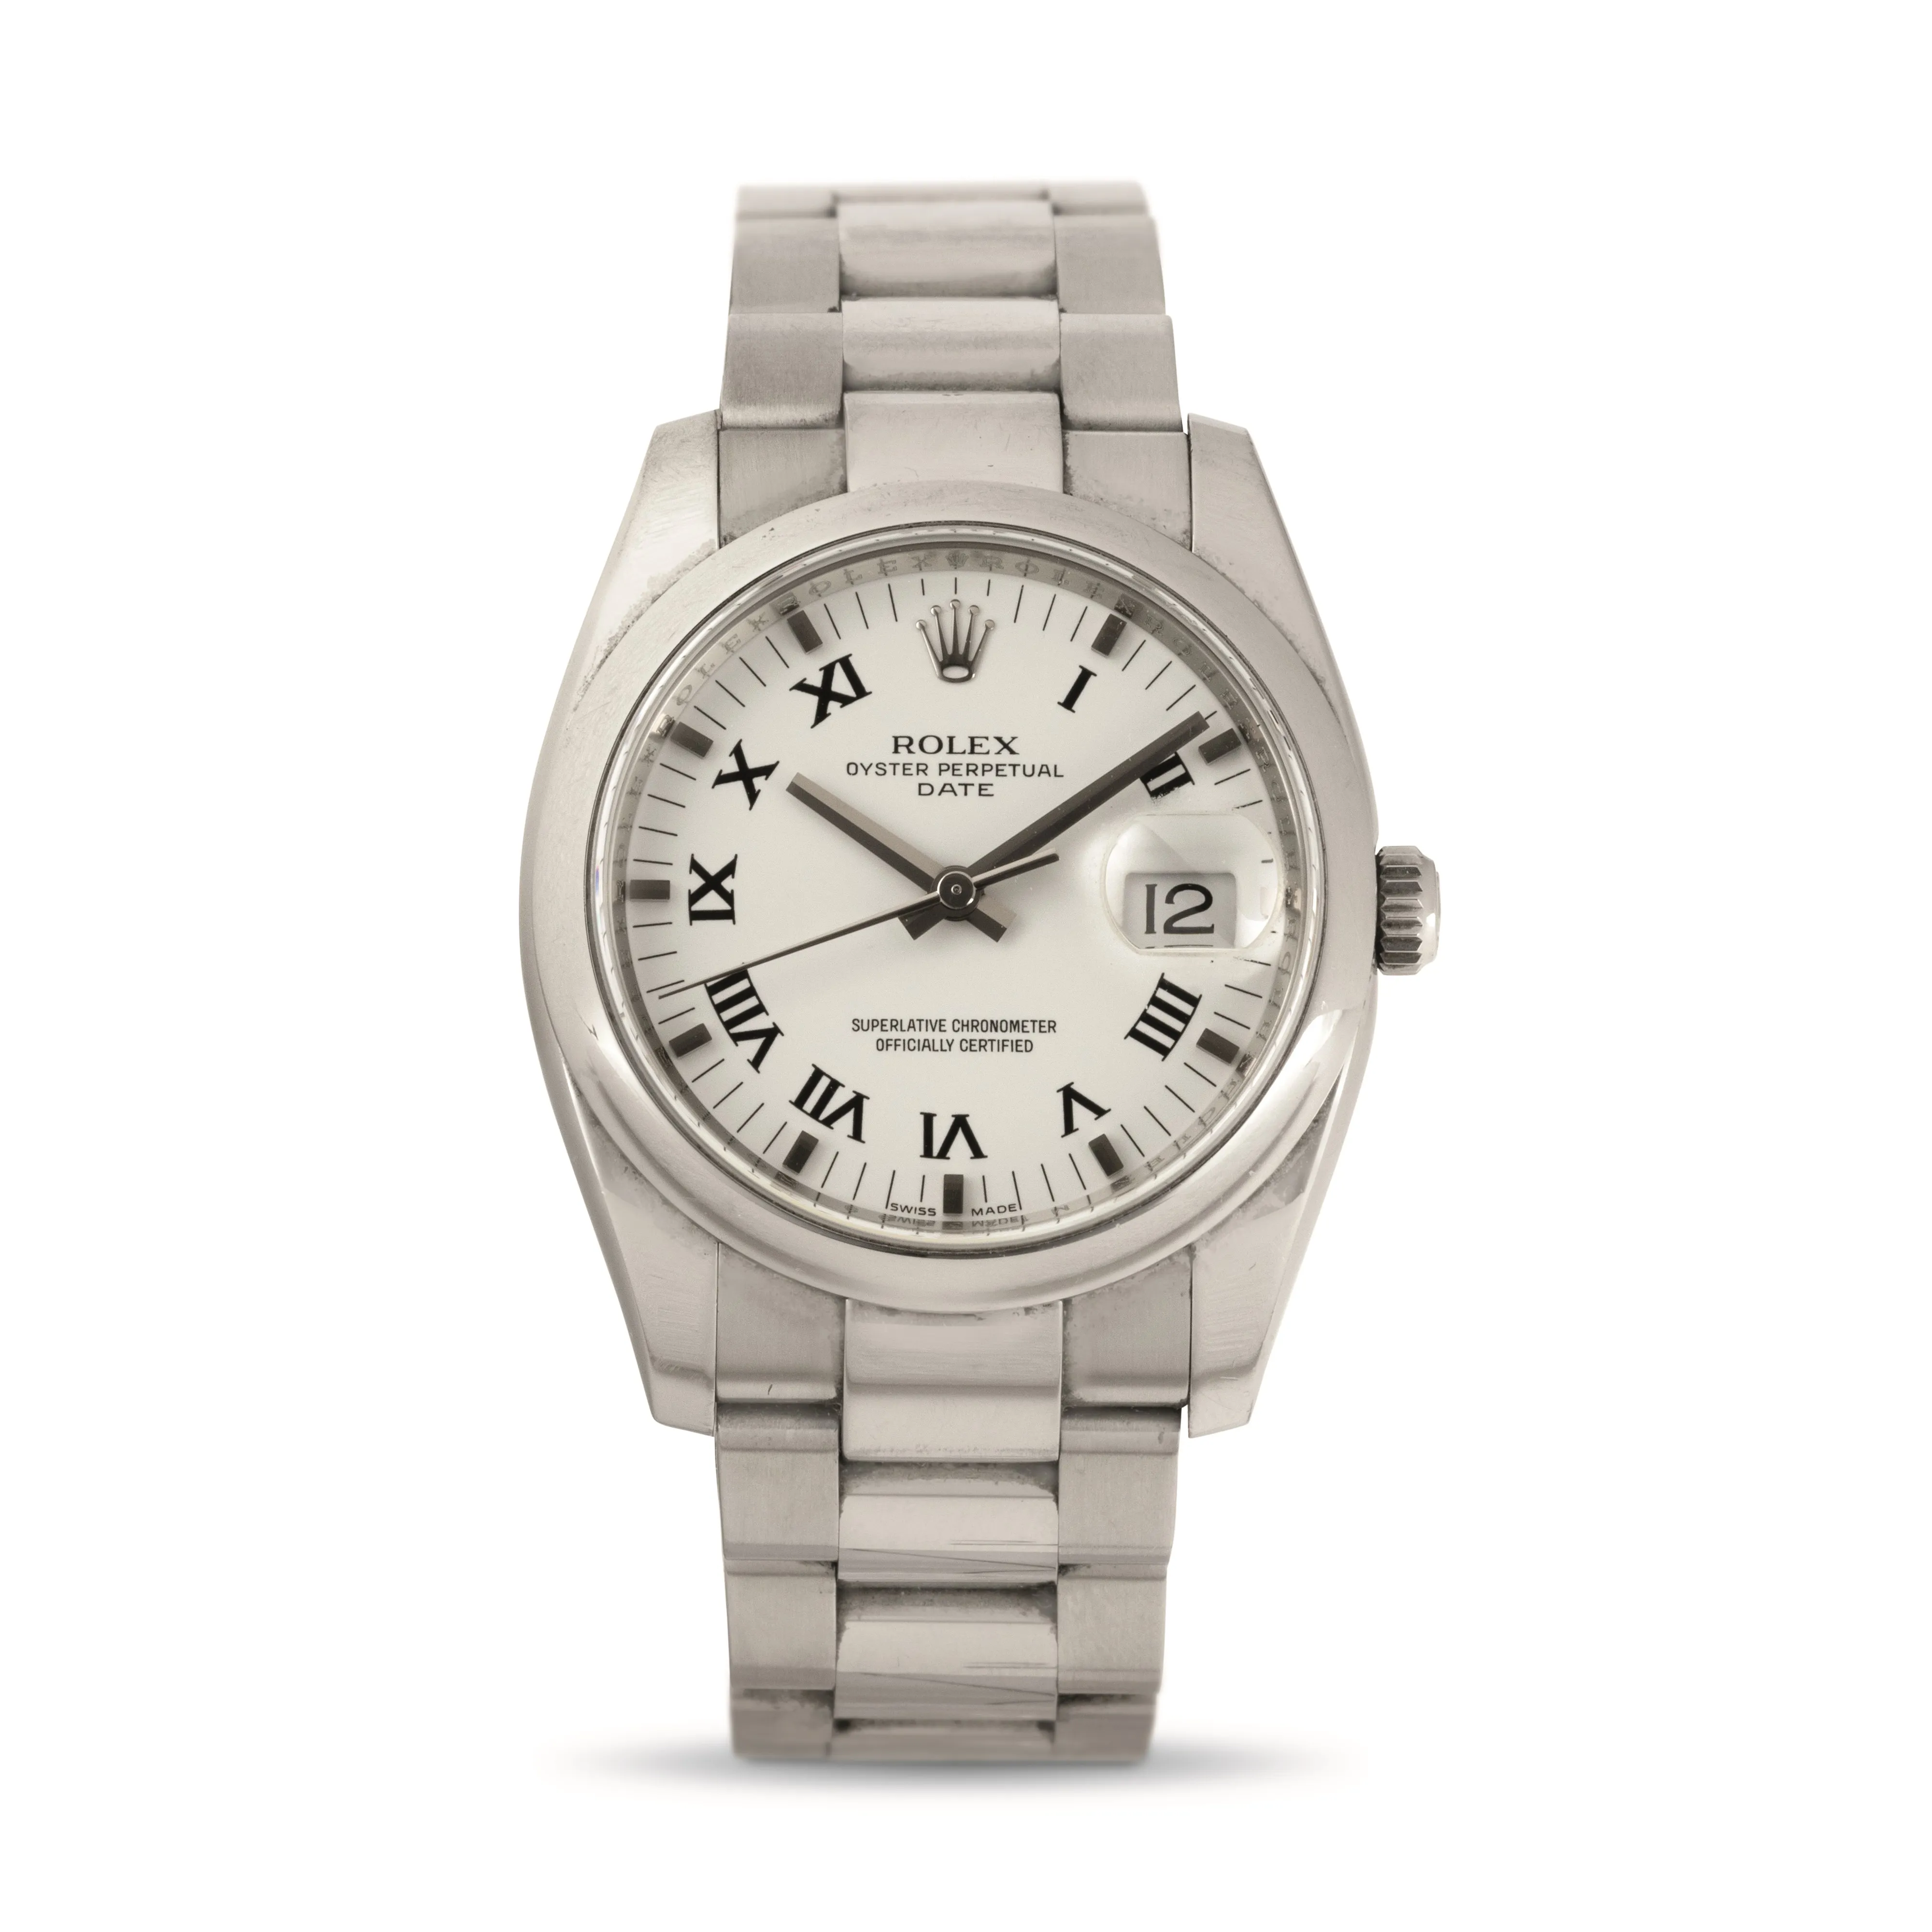 Rolex Oyster Perpetual Date 115200 34mm Steel White